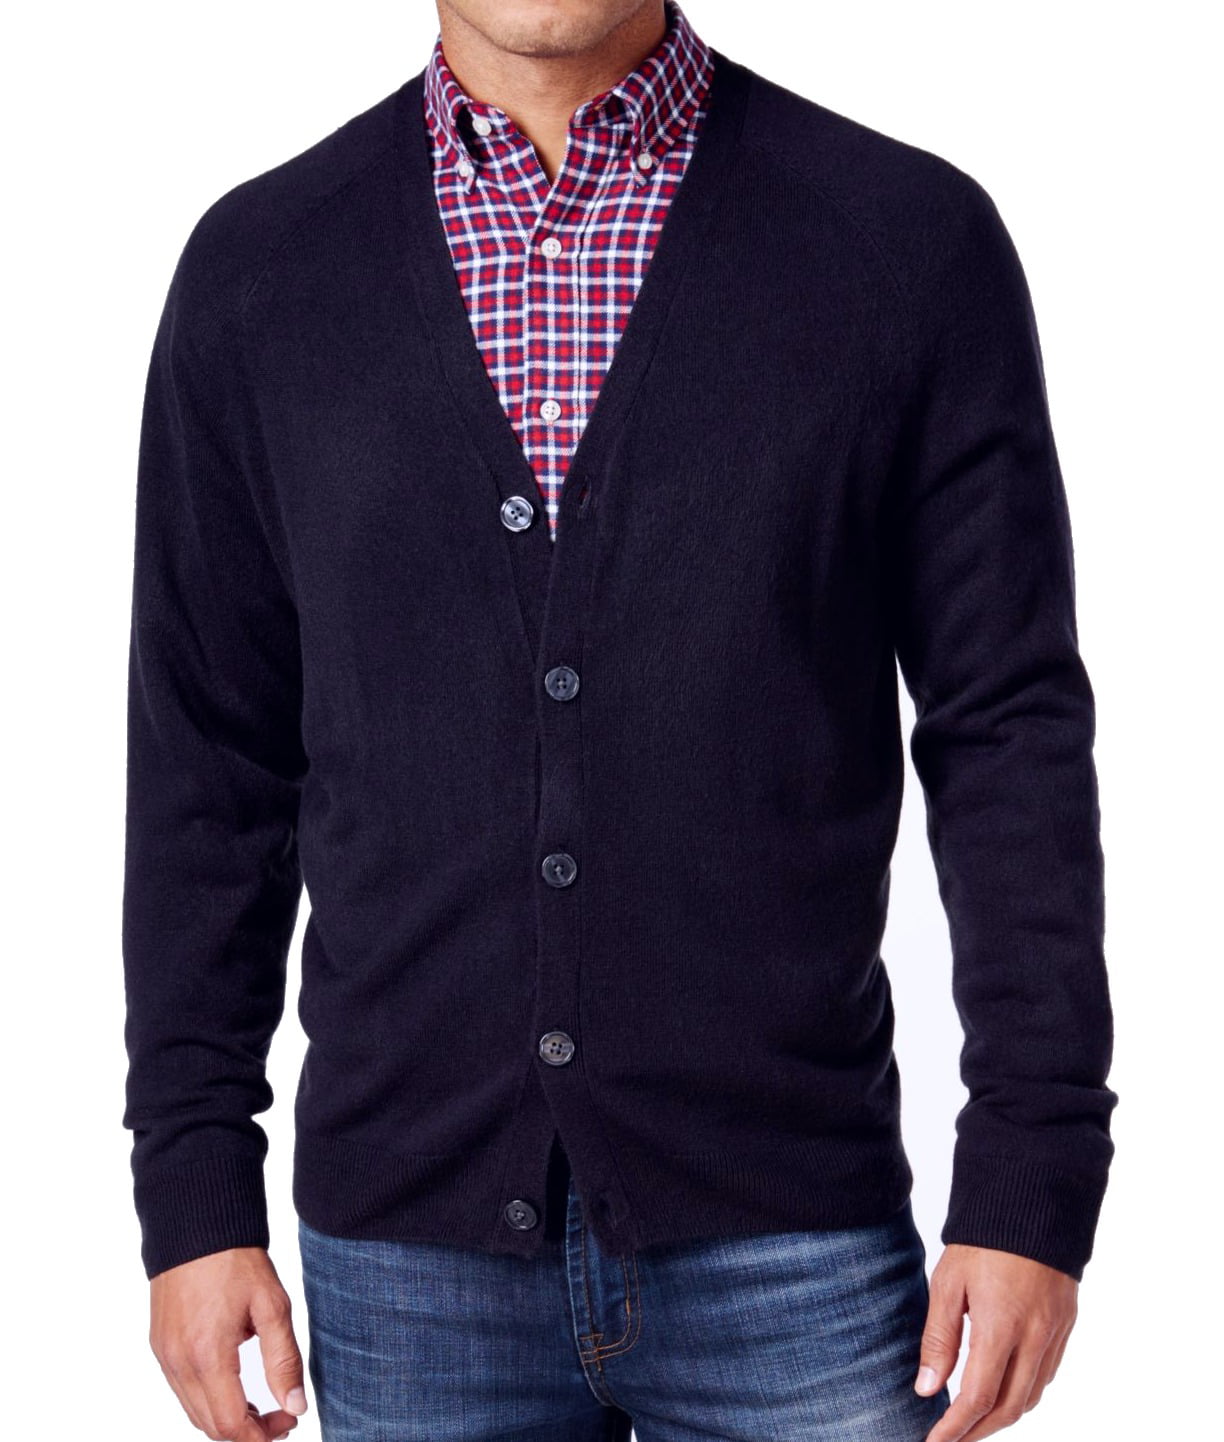 Essentials Mens Long-Sleeve Soft Touch Cardigan Sweater 